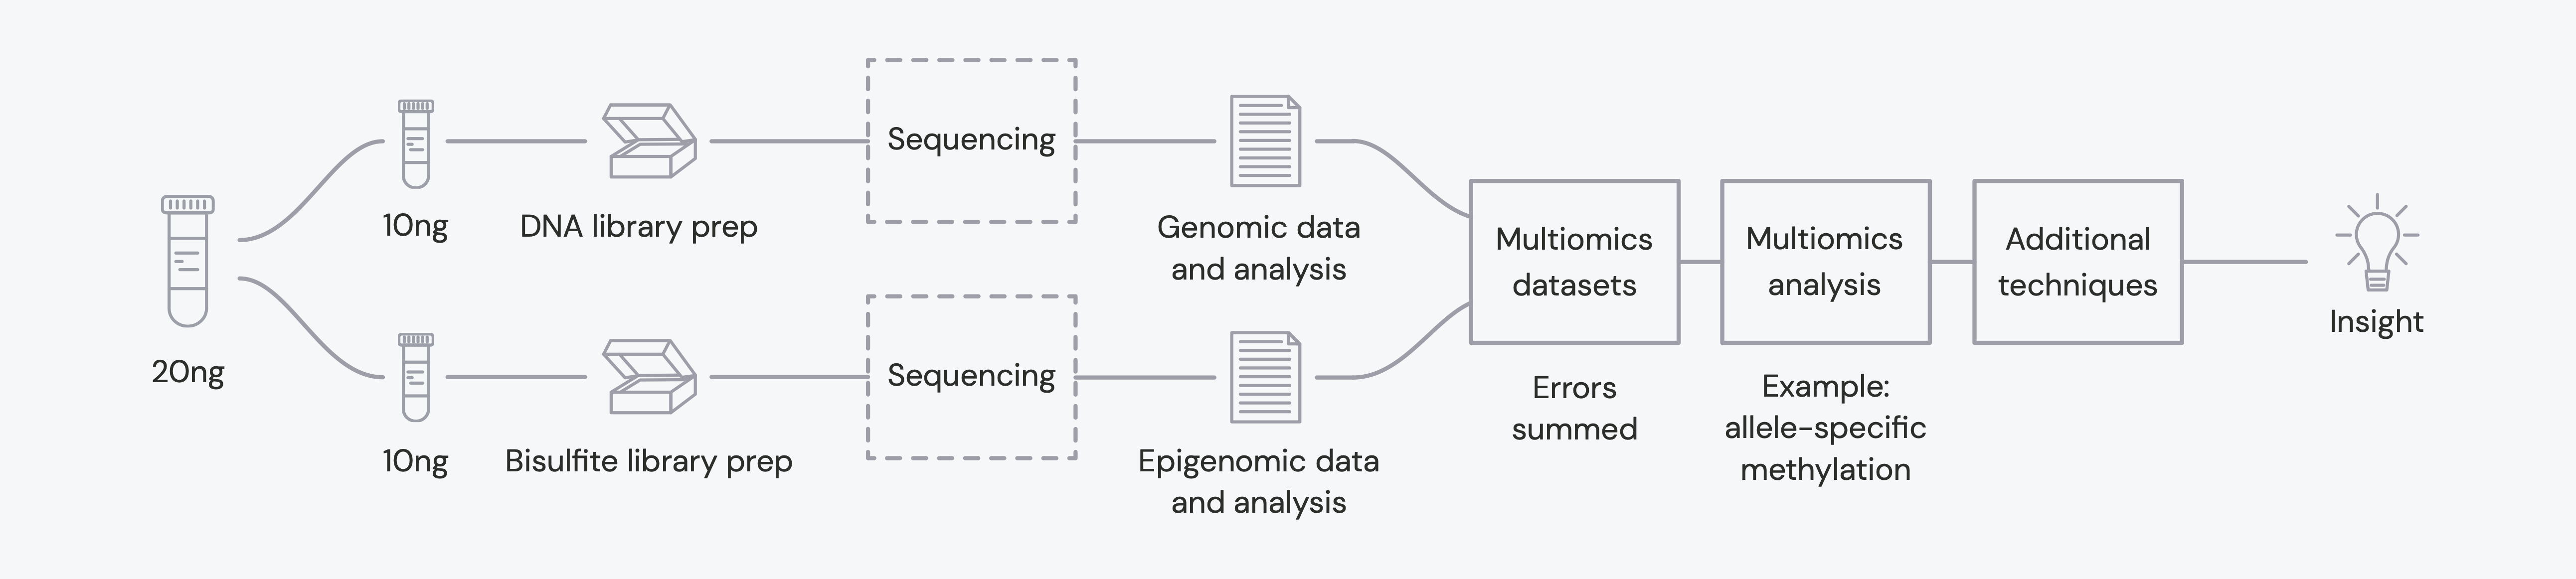 Conventional methods: 2 samples, 2 workflows, 3+ data analyses